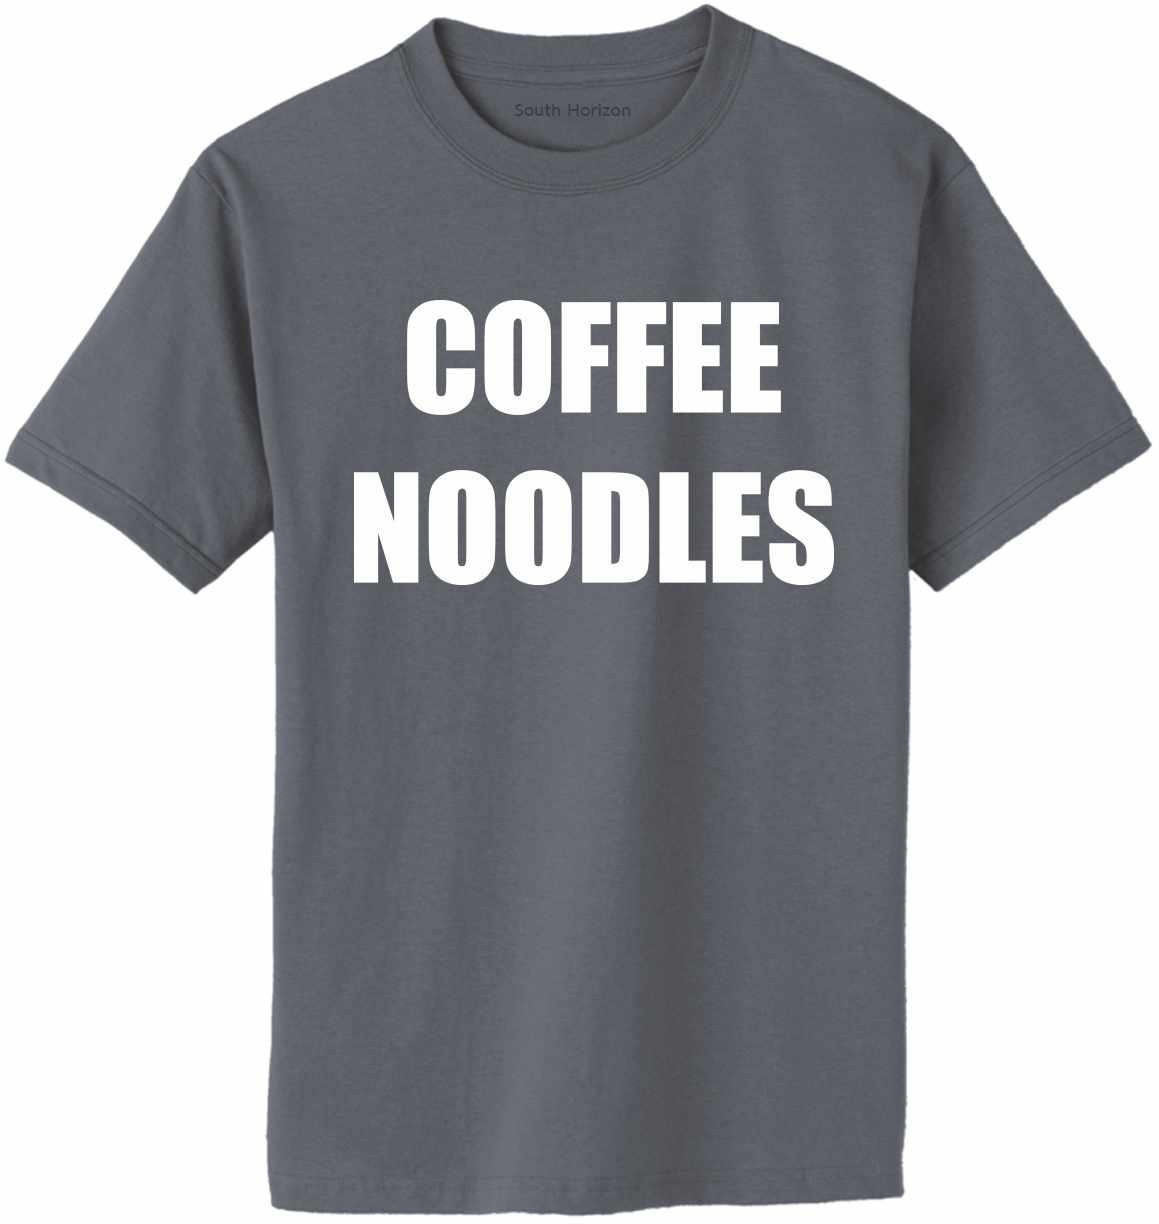 COFFEE NOODLES on Adult T-Shirt (#749-1)